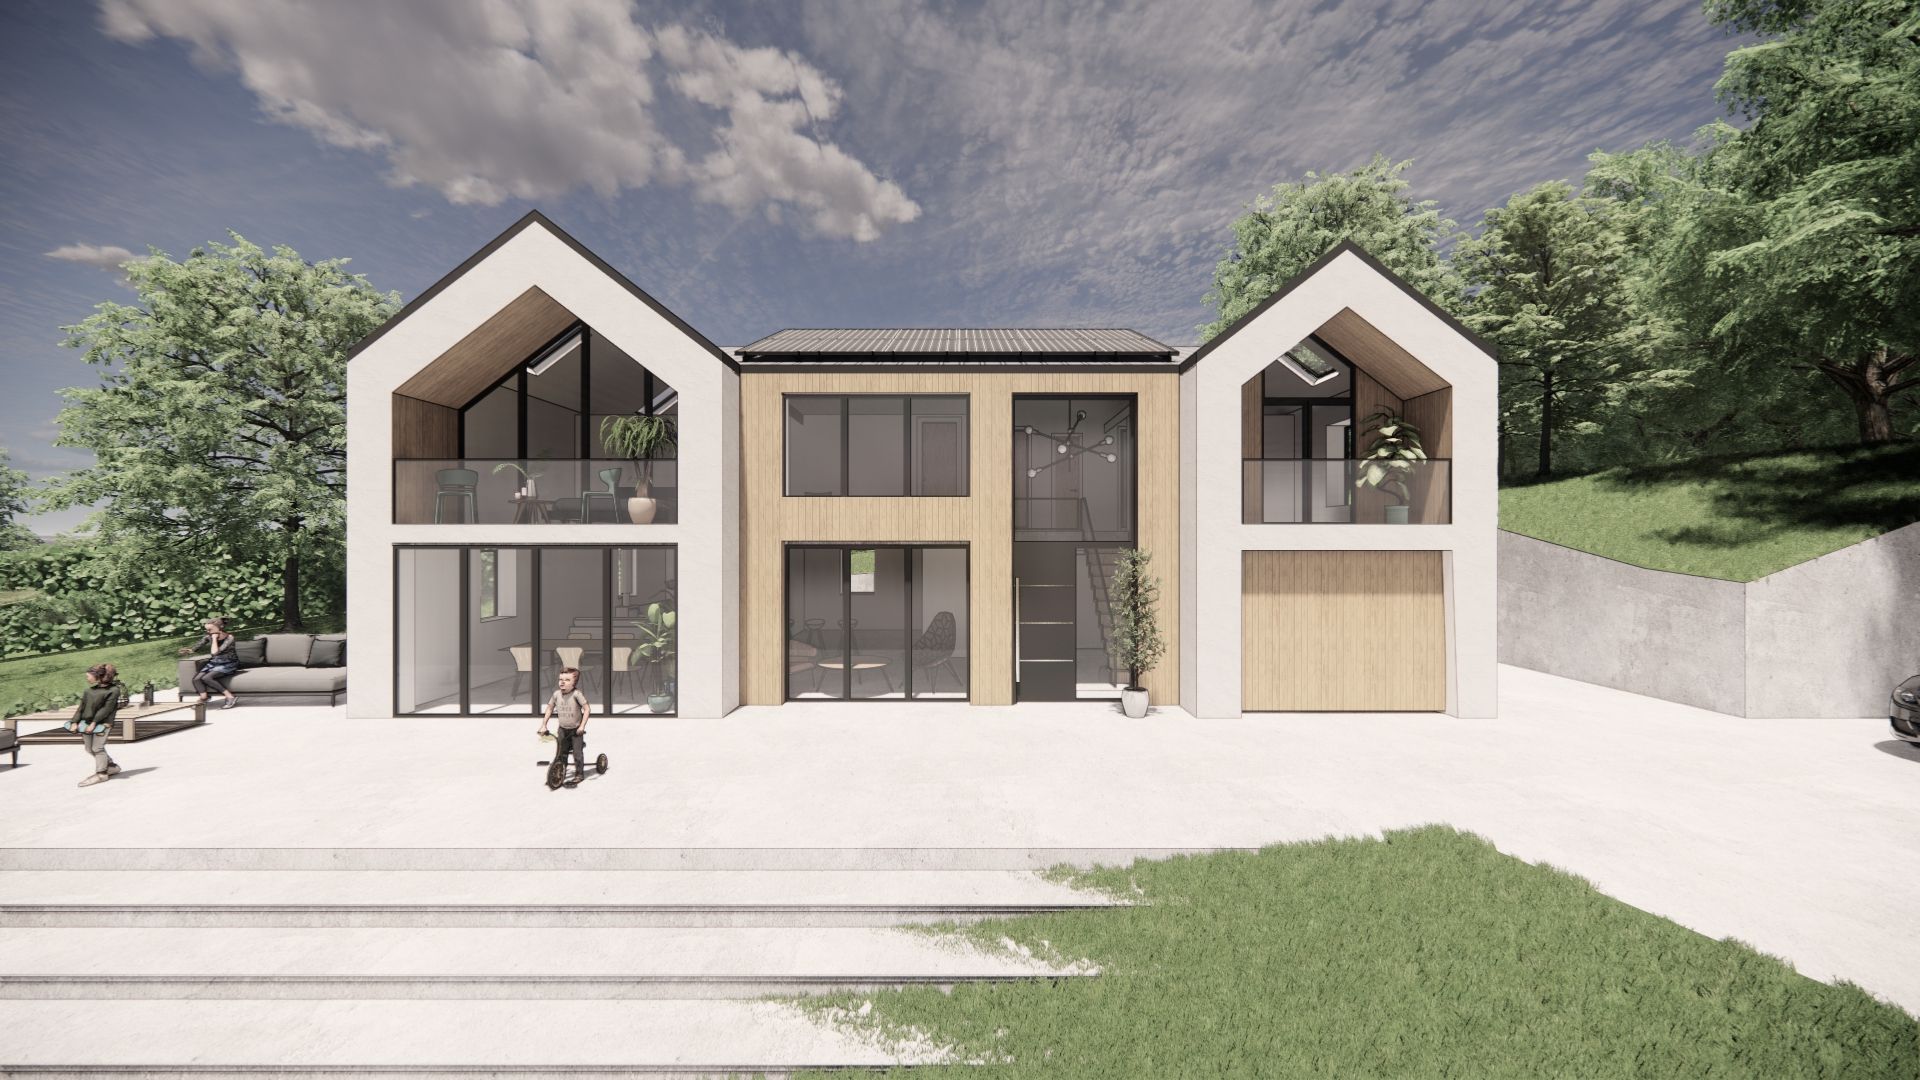 Planning granted for Derbyshire Eco-Home